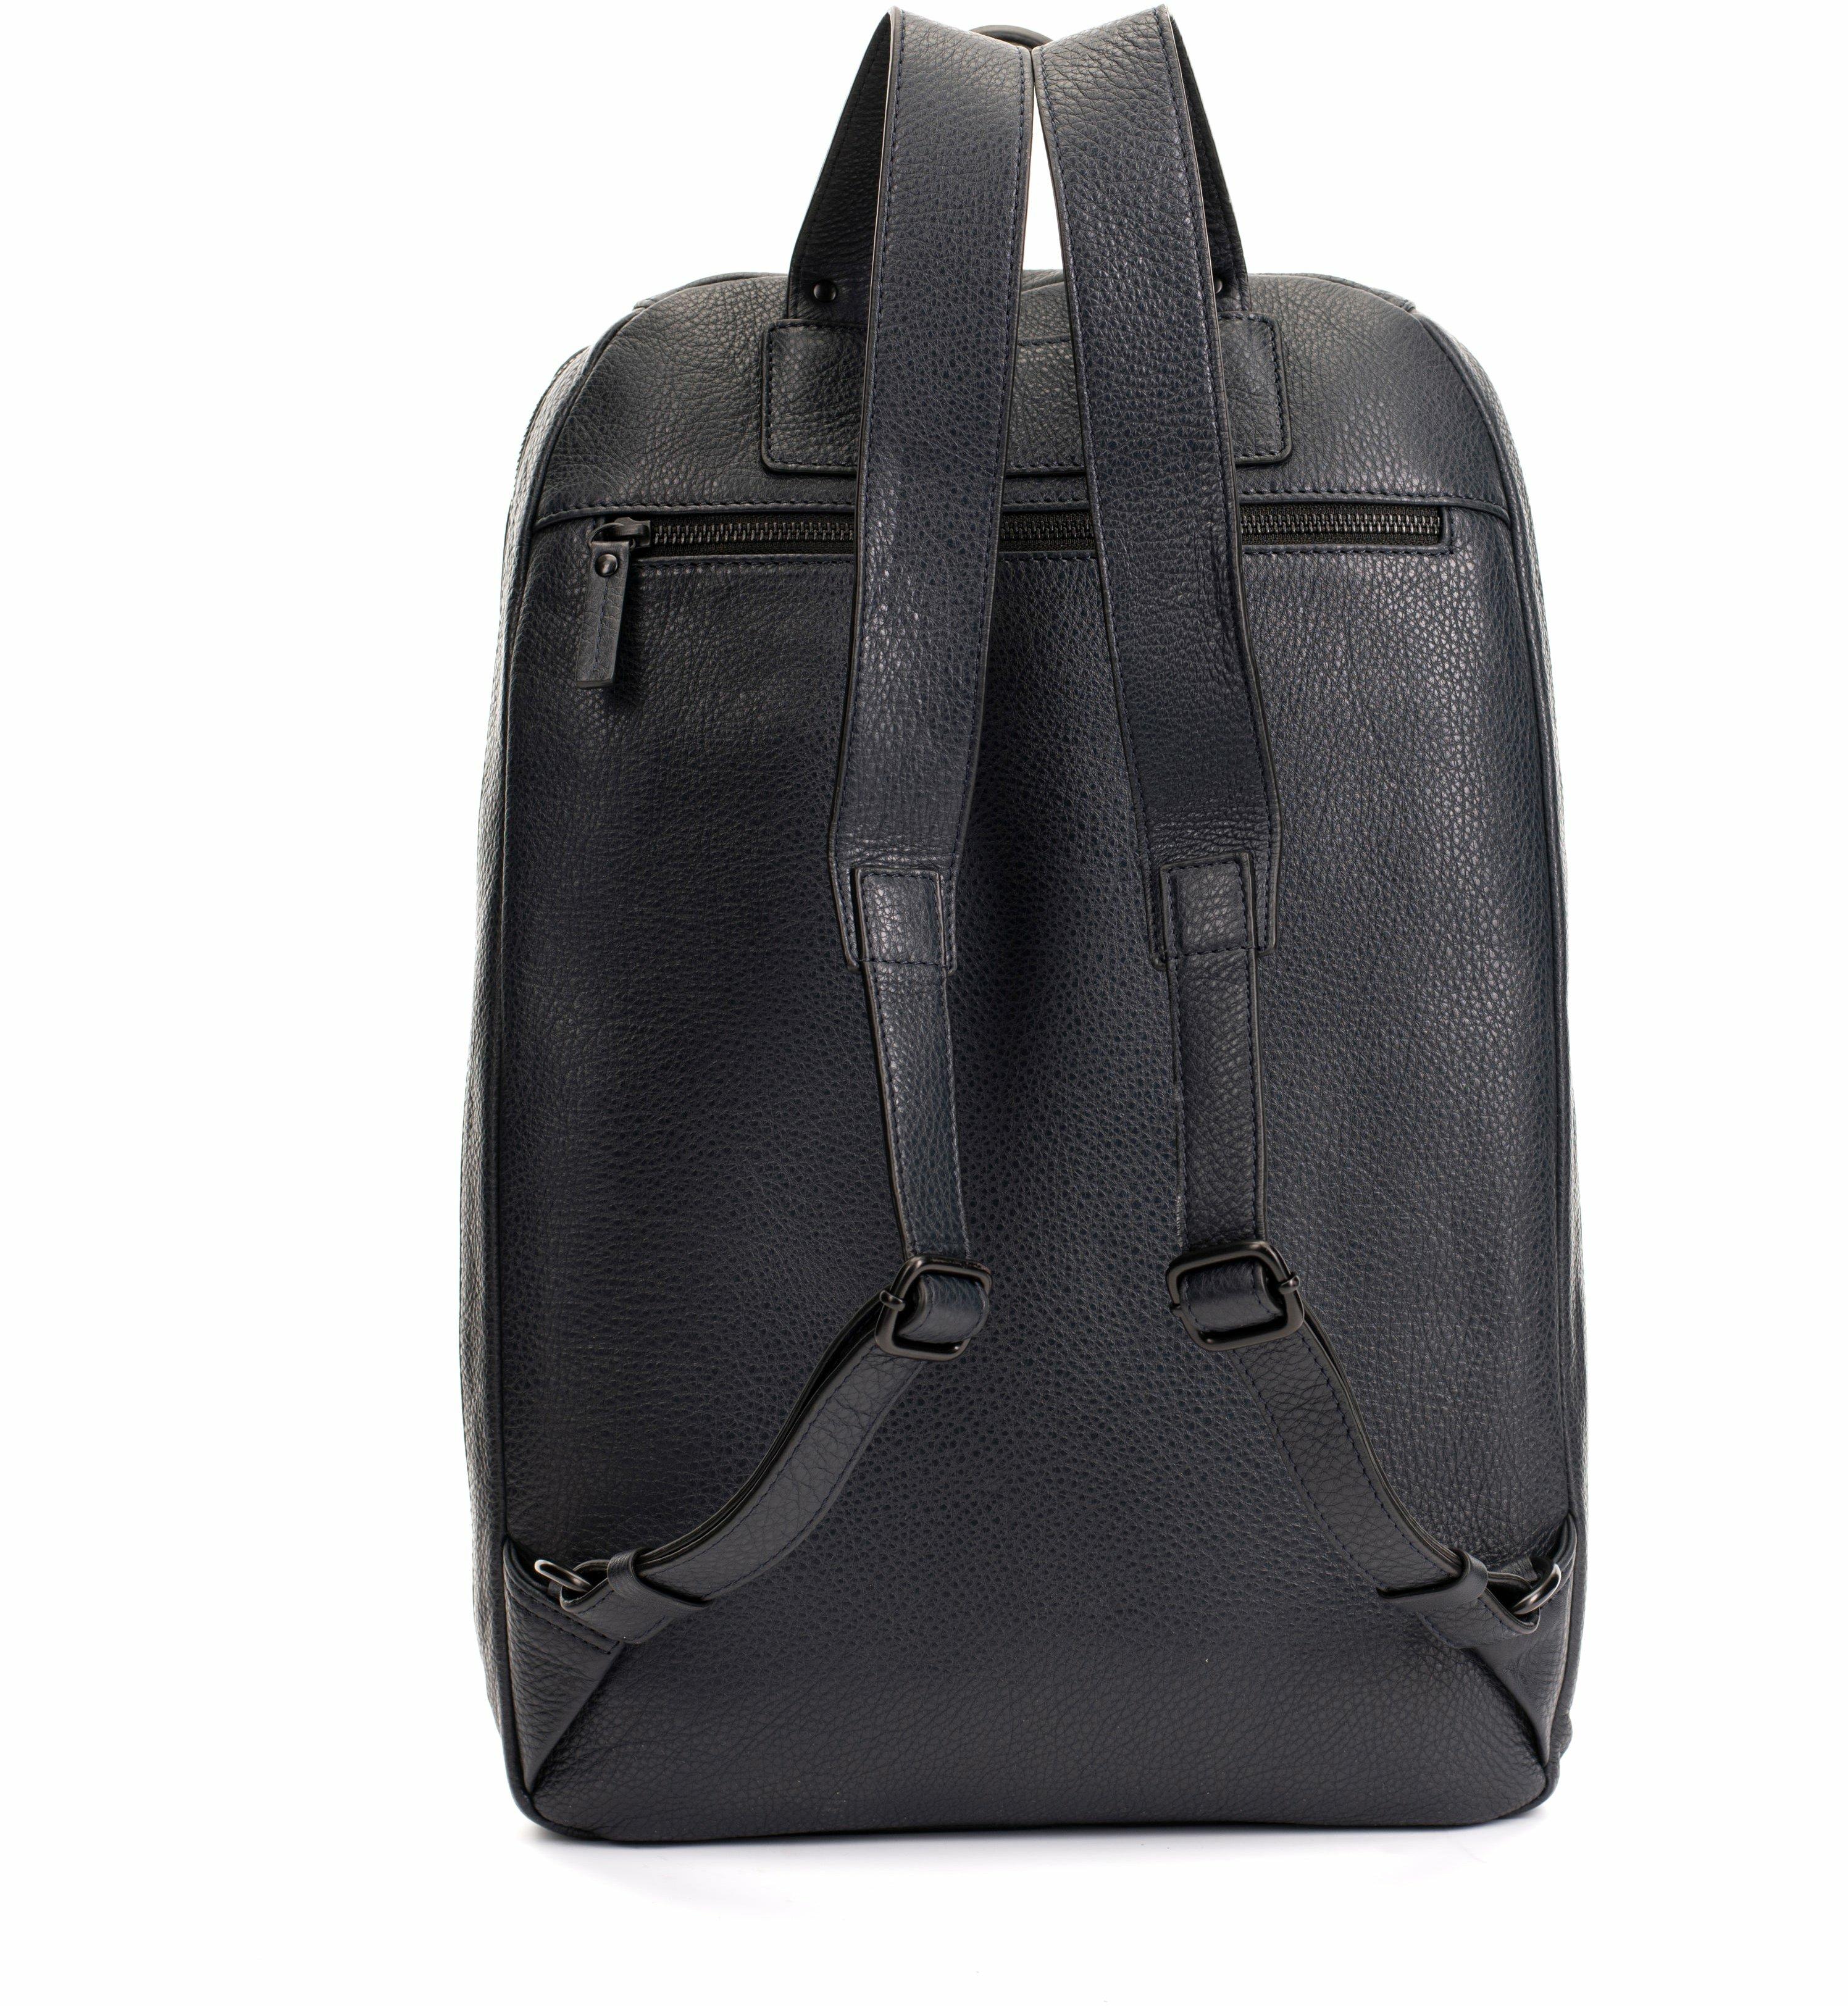 Gianni Conti 'Frey' Leather Backpack